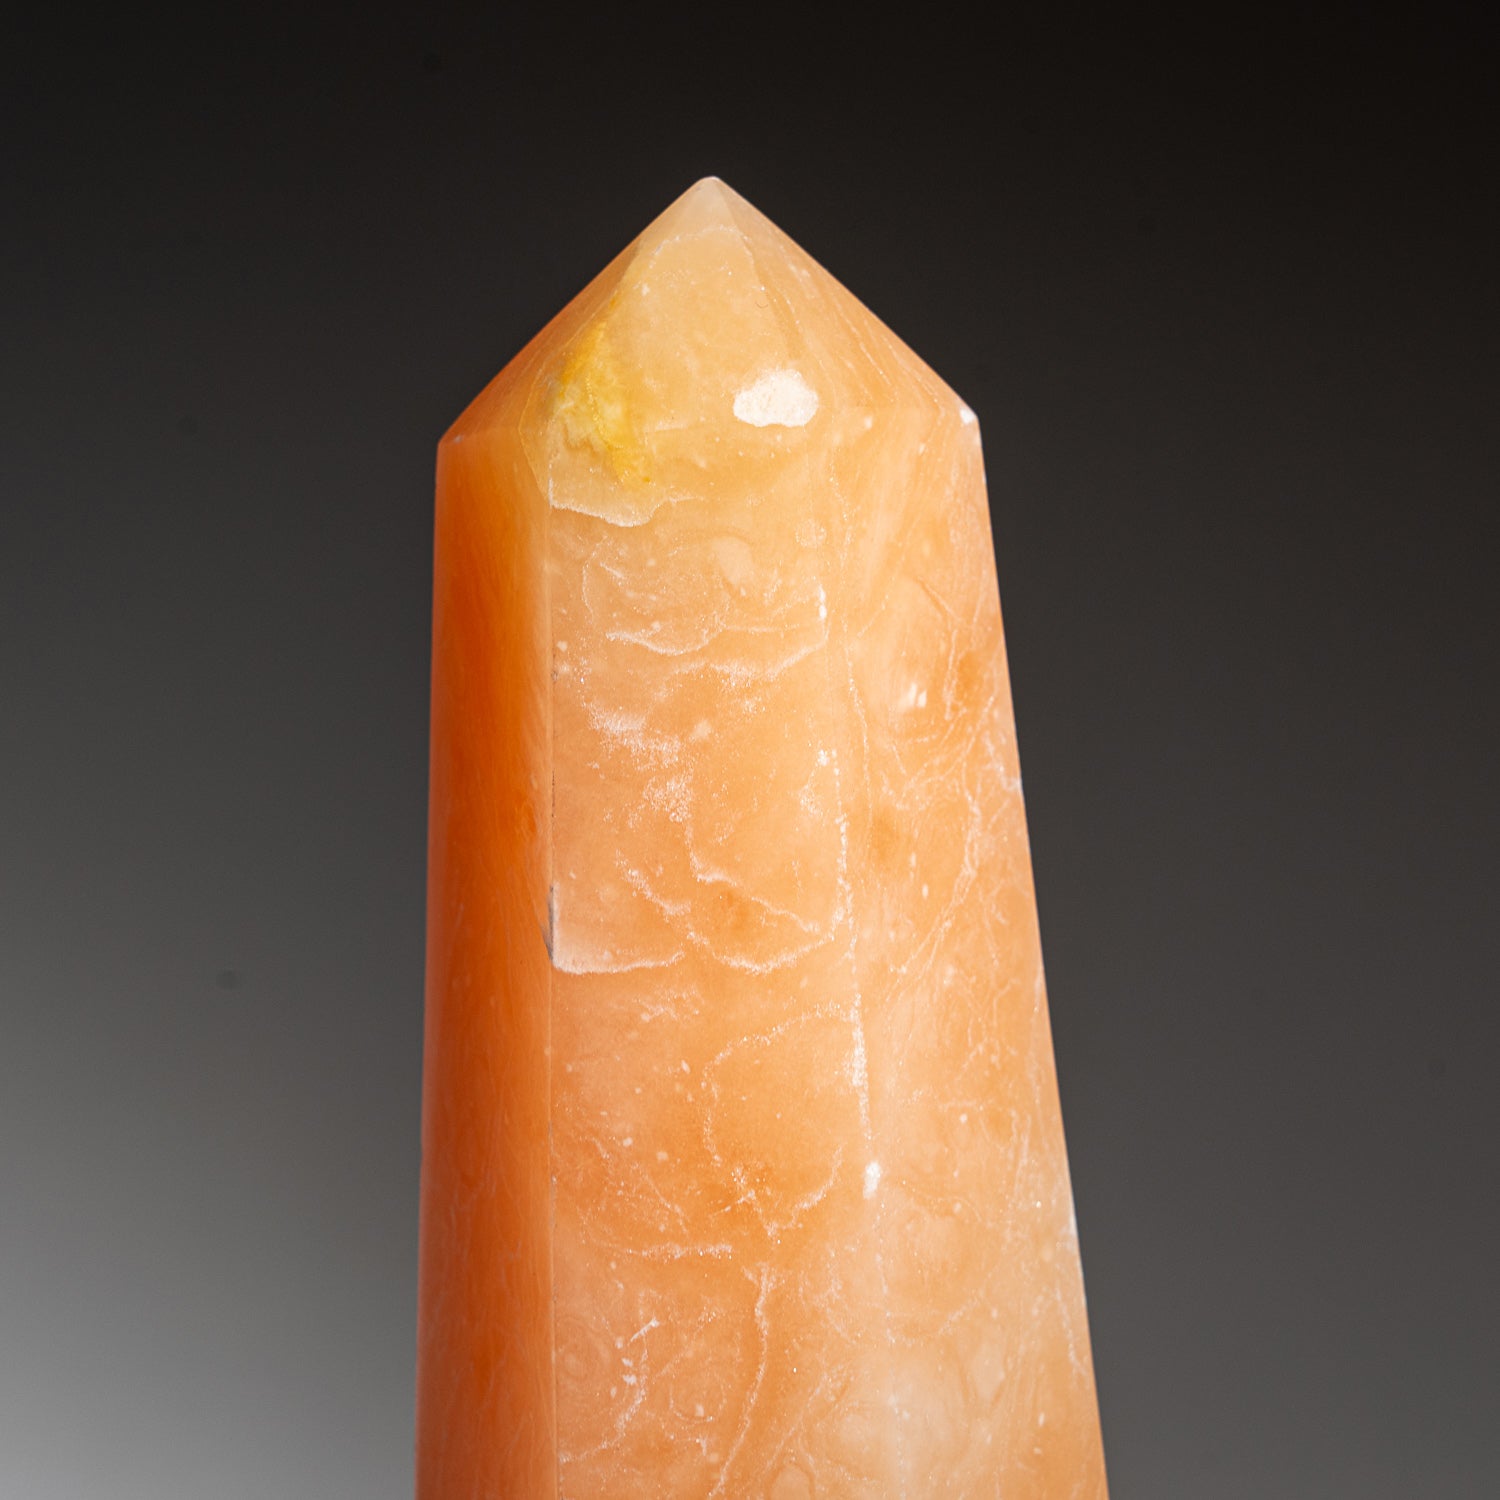 Genuine Polished Orange Selenite Point from Morocco (1.9 lbs)